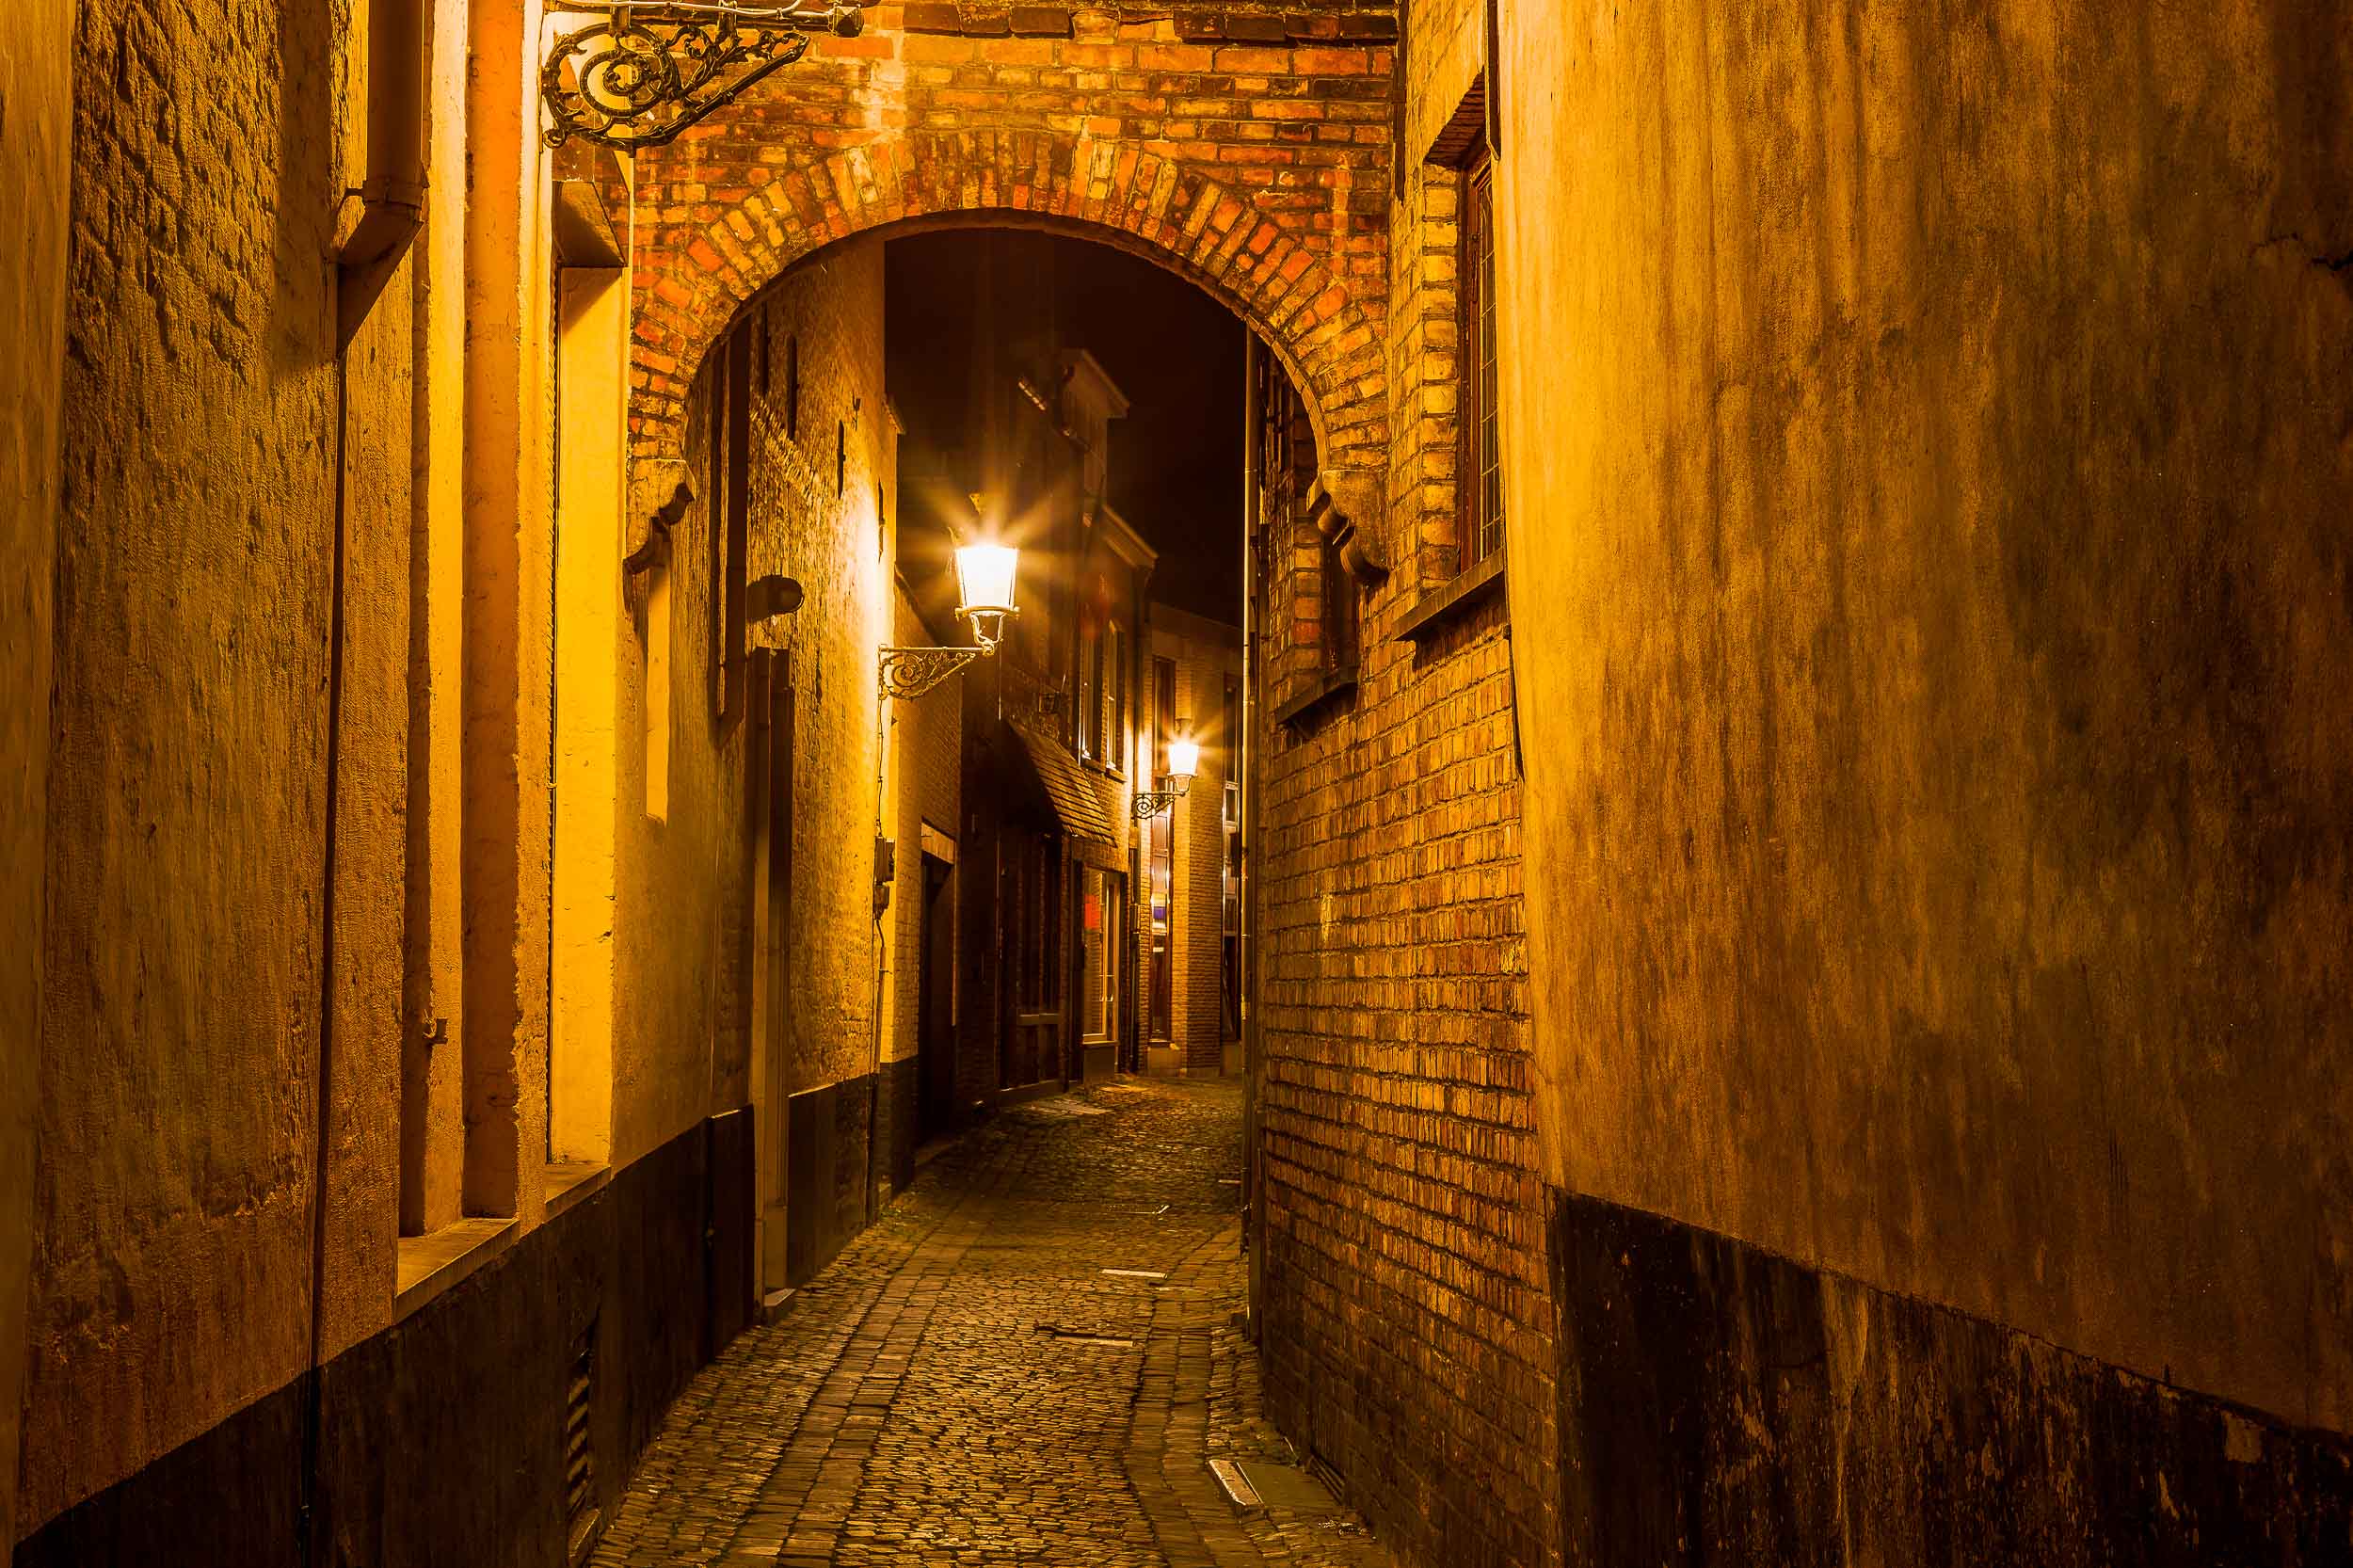 A  colorfully lit alleyway , photographed at night, in the city of  Bruges  (i.e., Brugge),  Belgium .